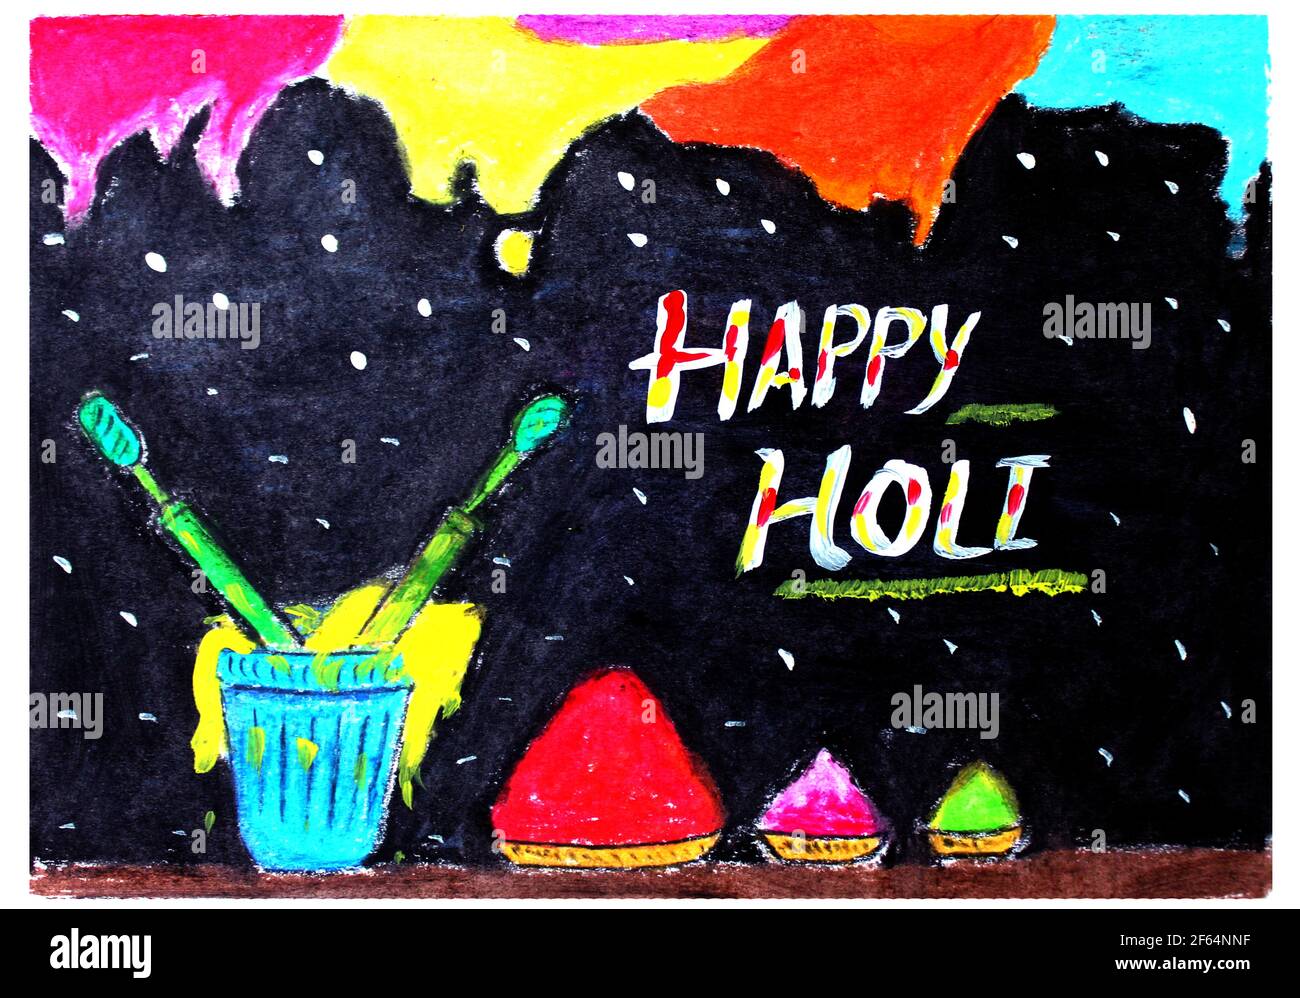 Indian holi Festival card design, Happy holi Abstract Painting ...